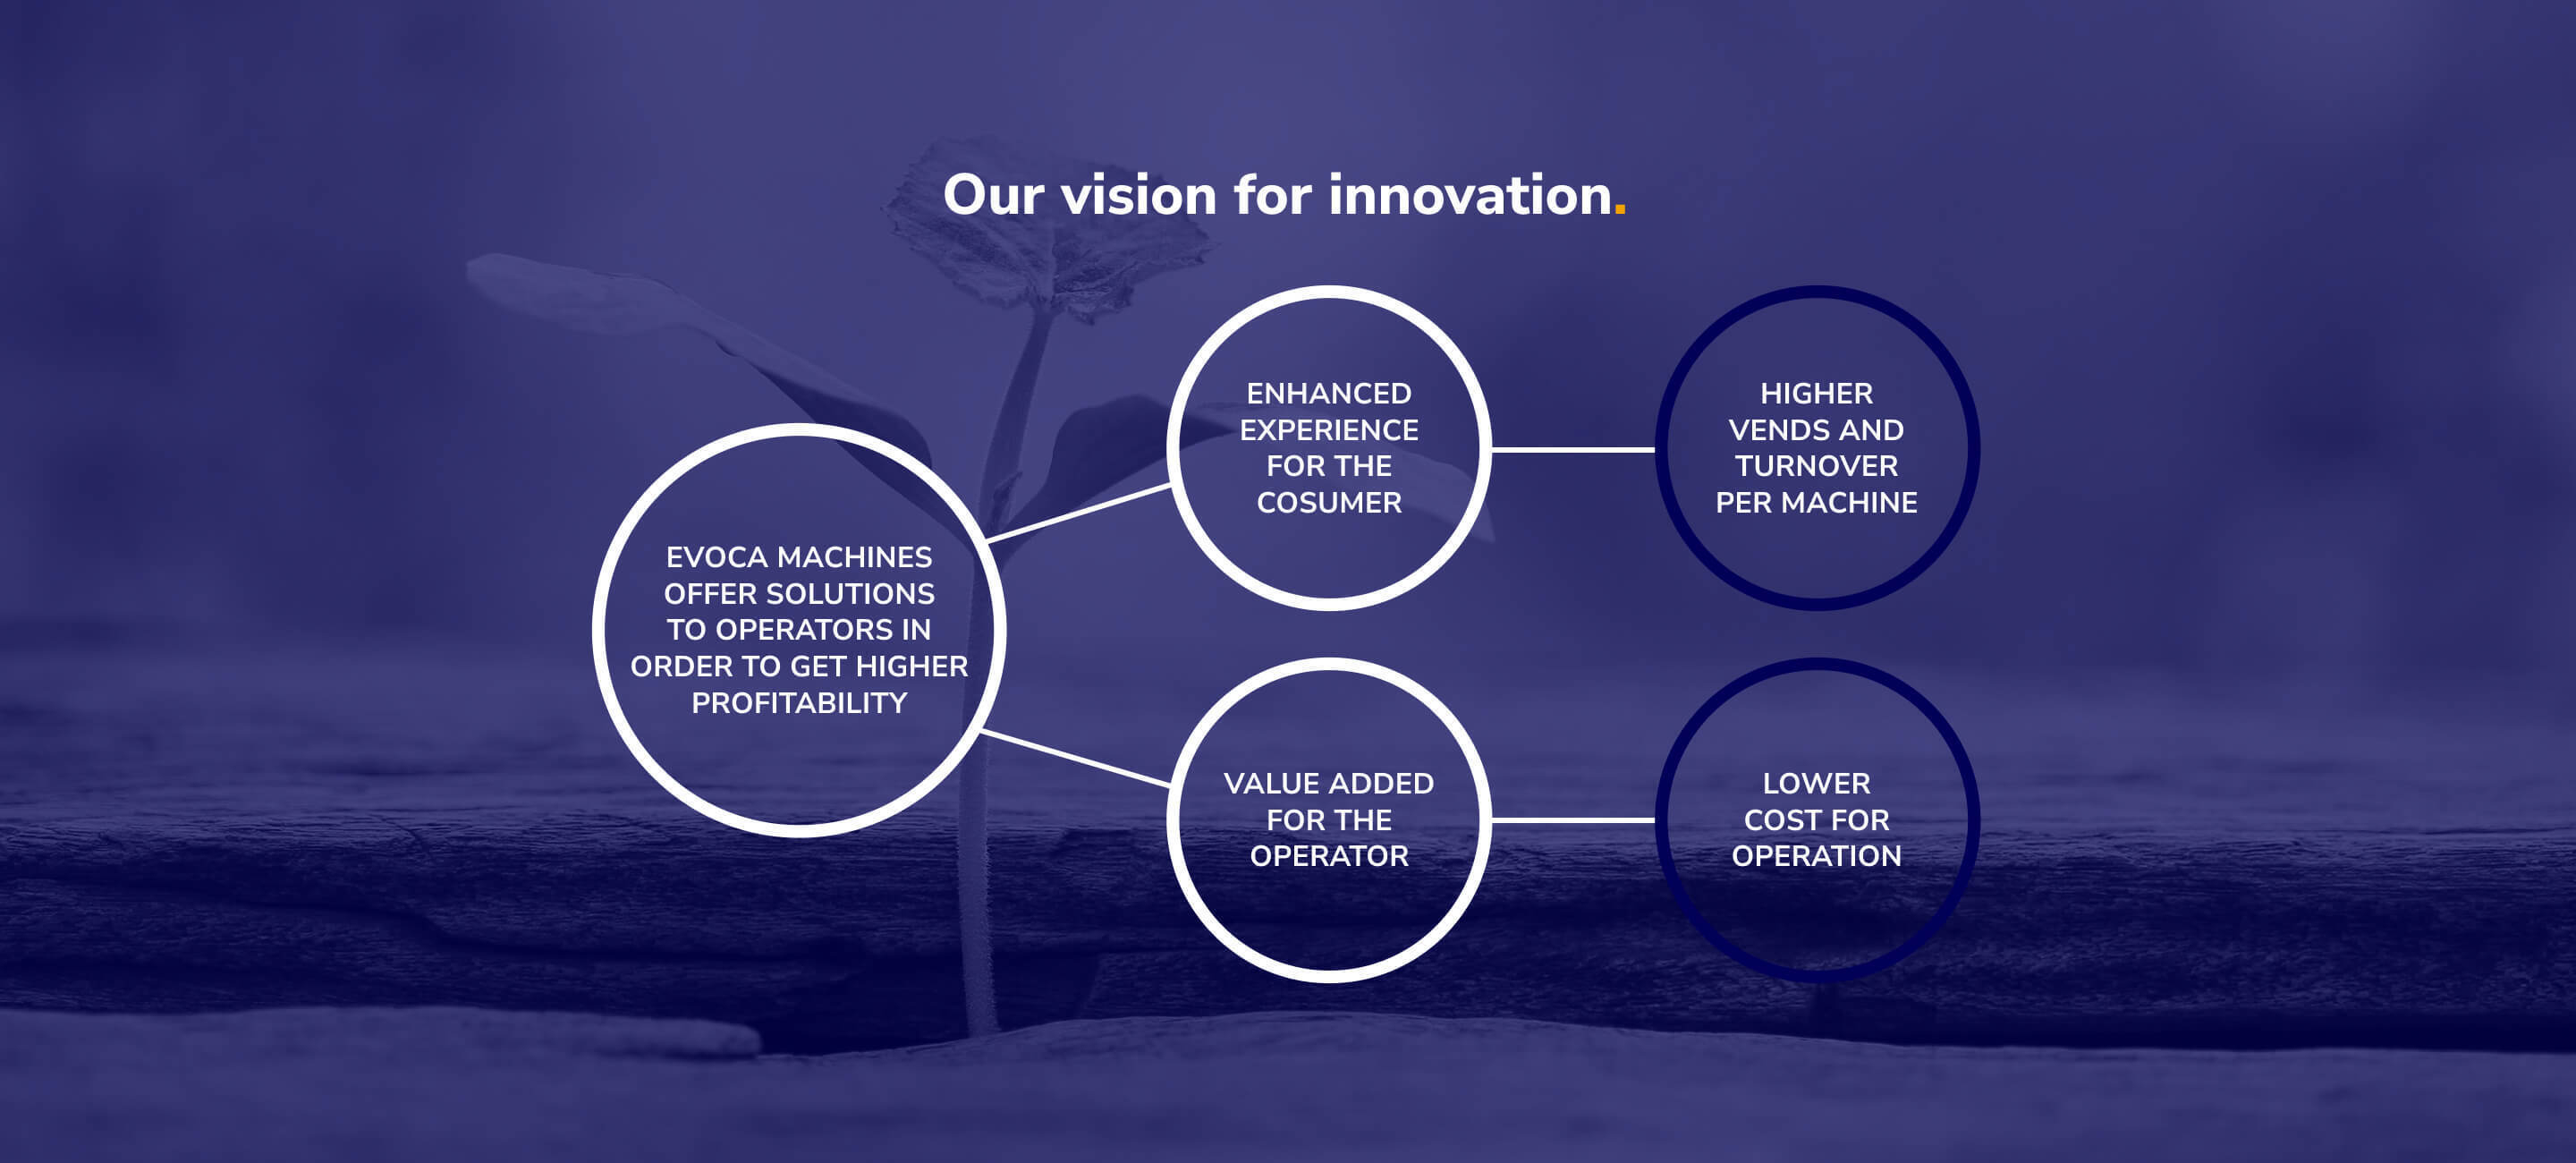 Our vision for innovation